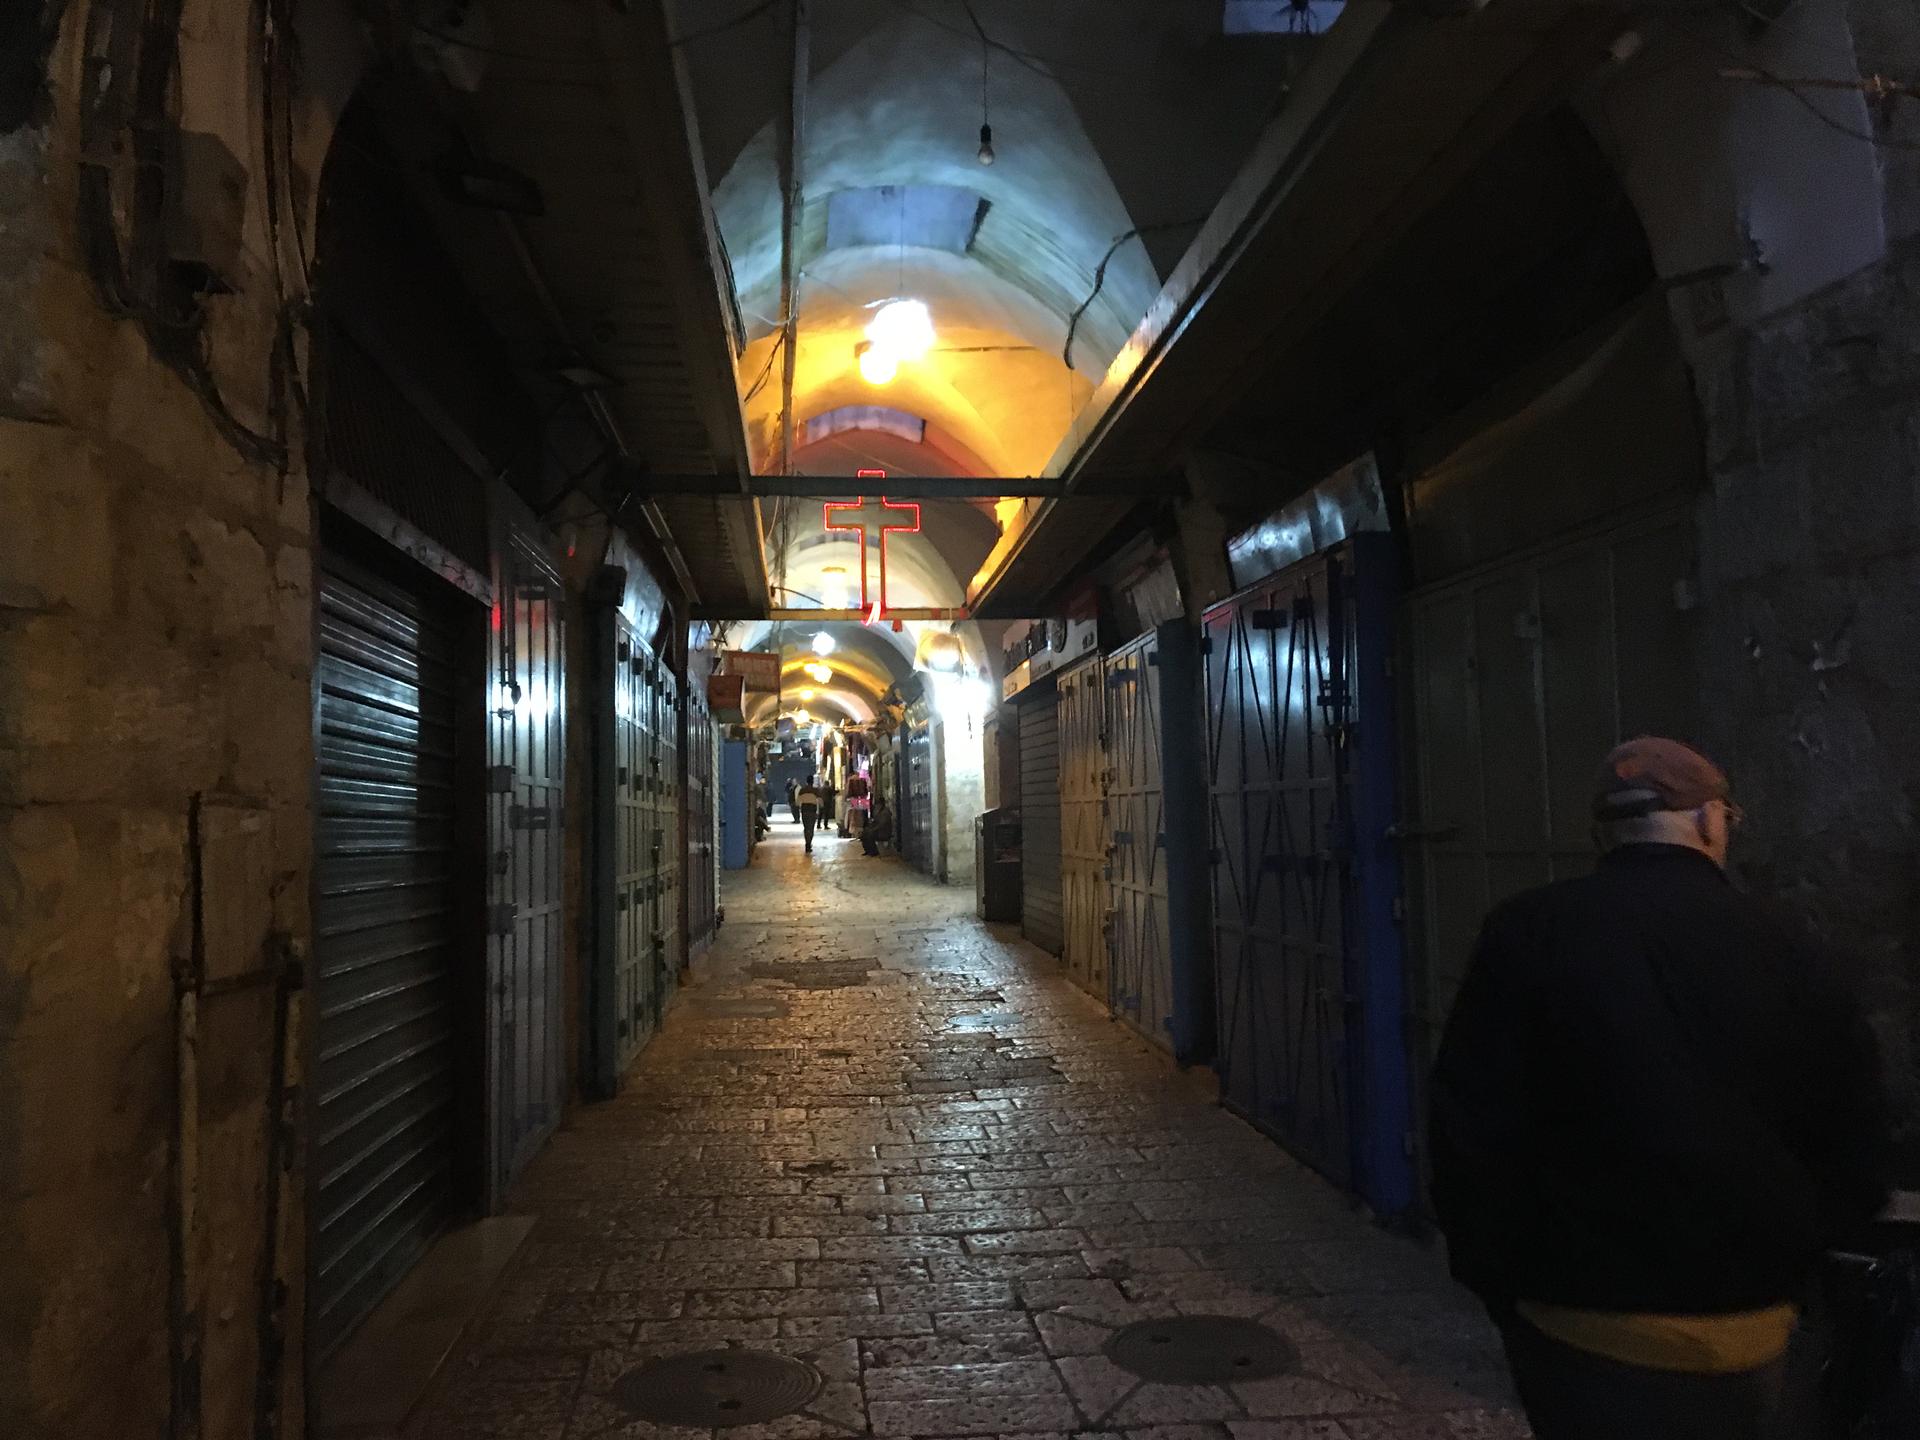 The Christian Quarter of the Old City, where shops are shuttered.